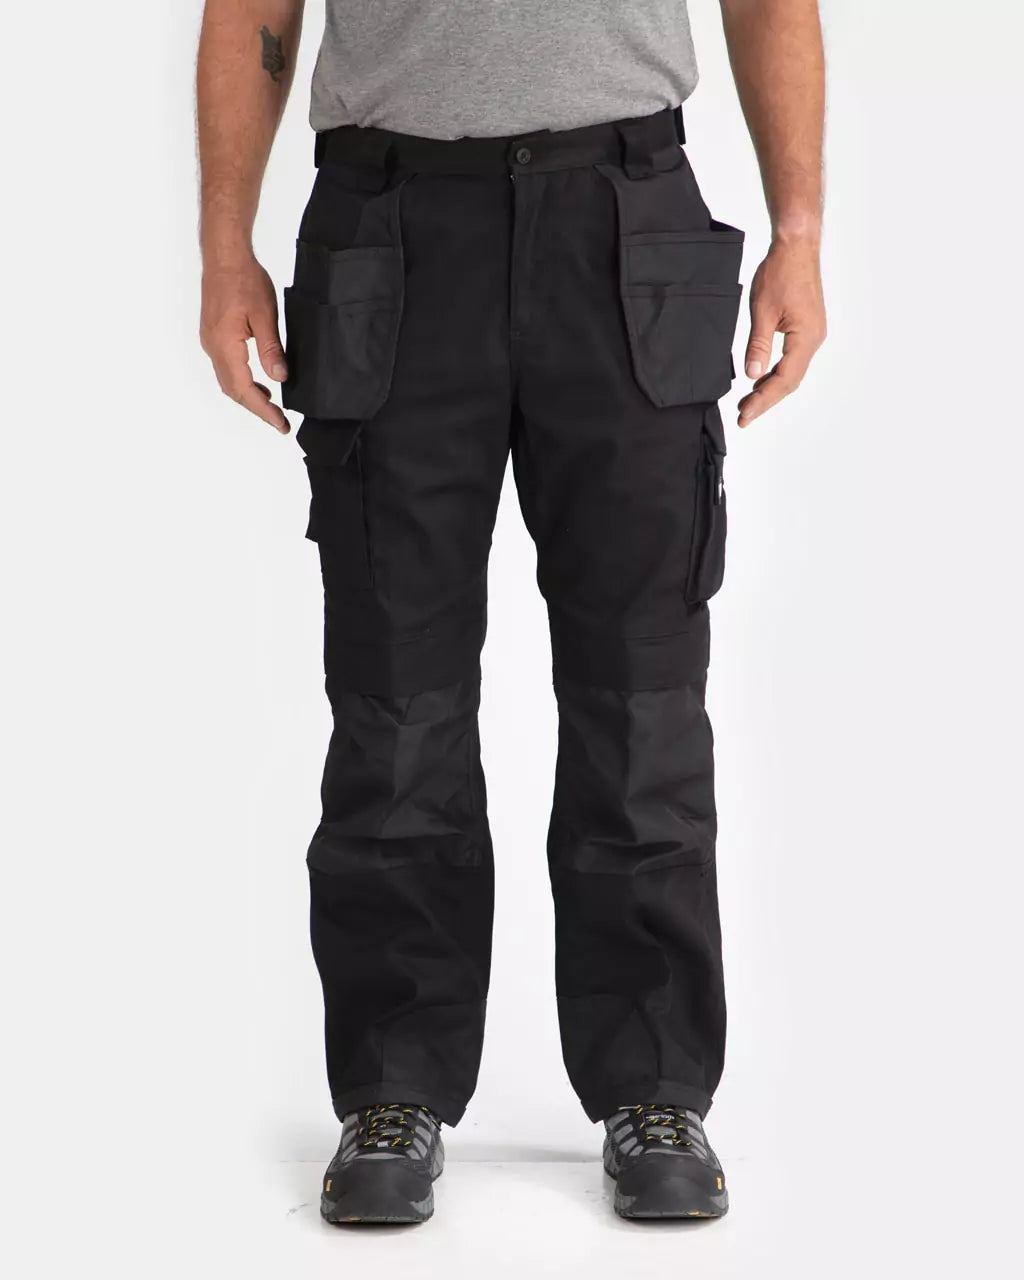 PRODUCT REVIEW: Caterpillar Trademark Trouser Work Pants — Dave's New York